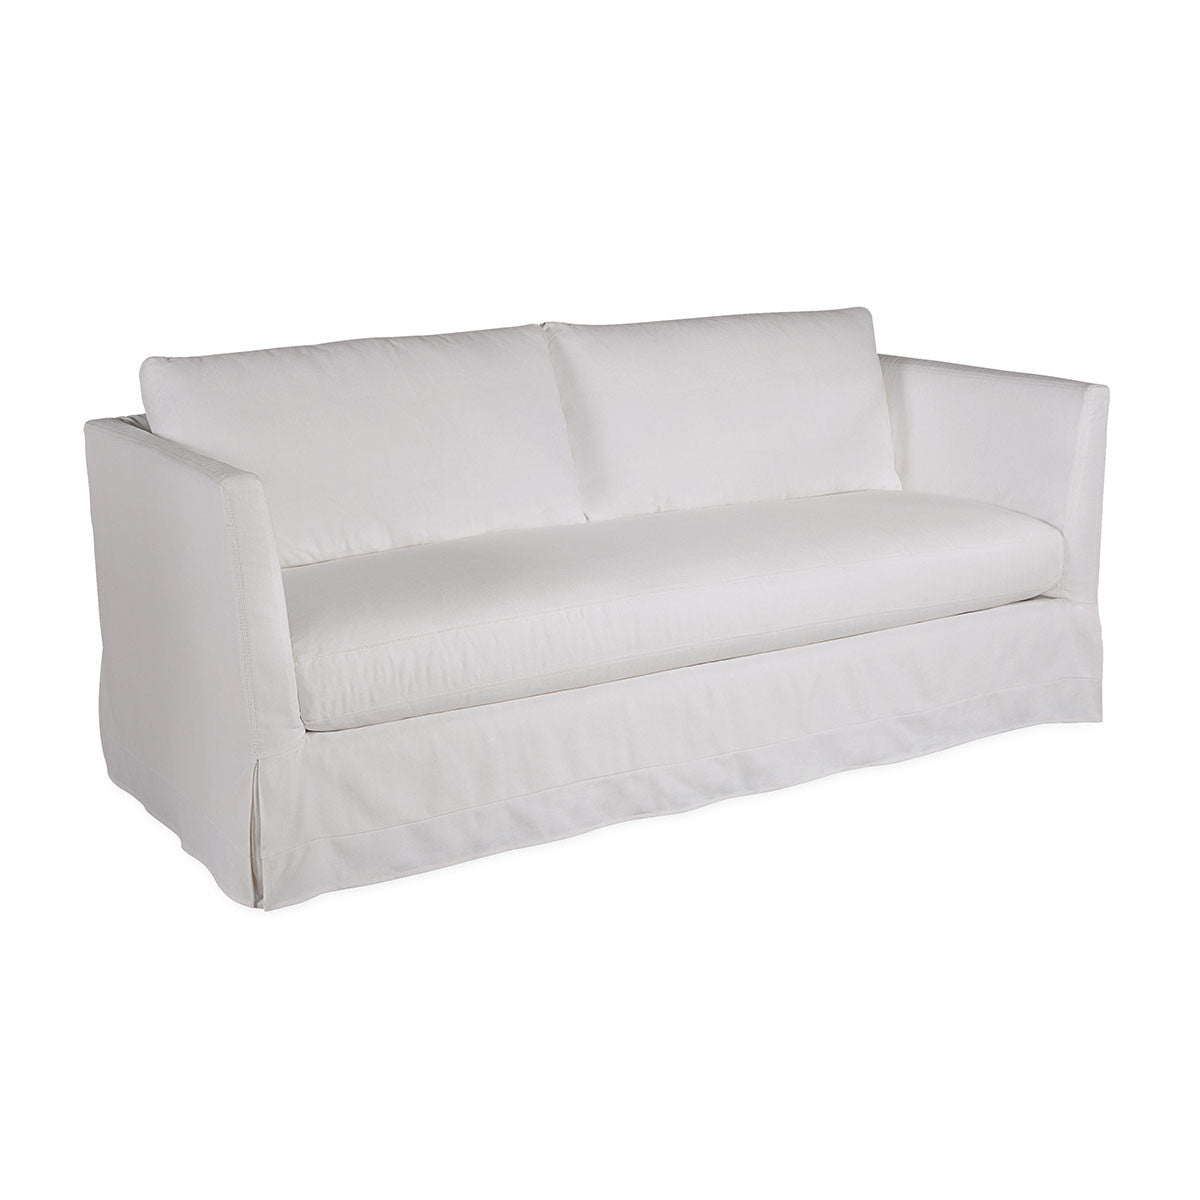 Contemporary slipcovered two seater sofa